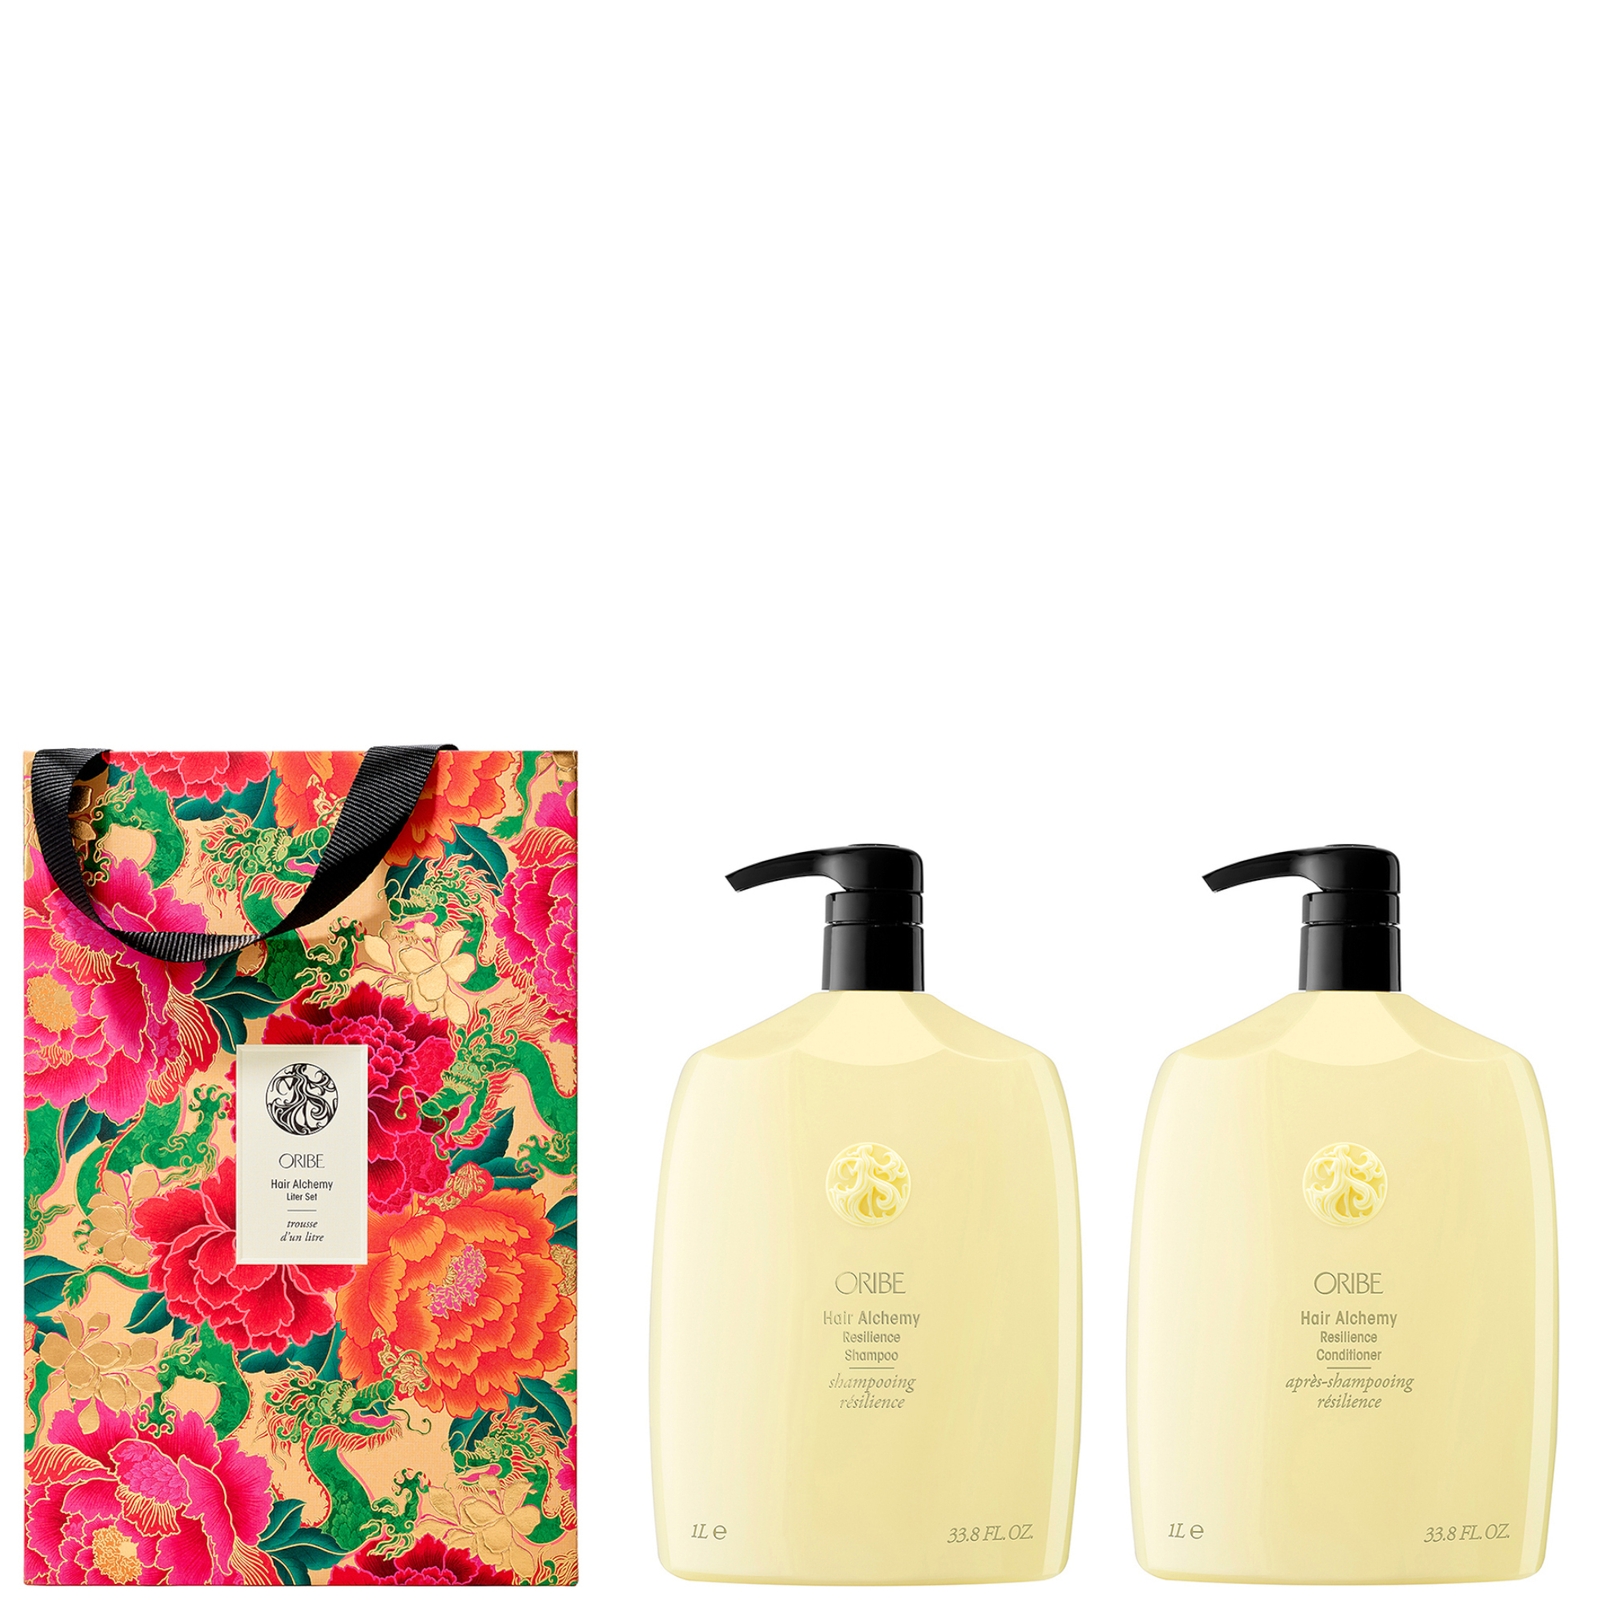 Oribe Lunar New Year Hair Alchemy Strengthening Shampoo And Conditioner Liter Set (worth $359) In White